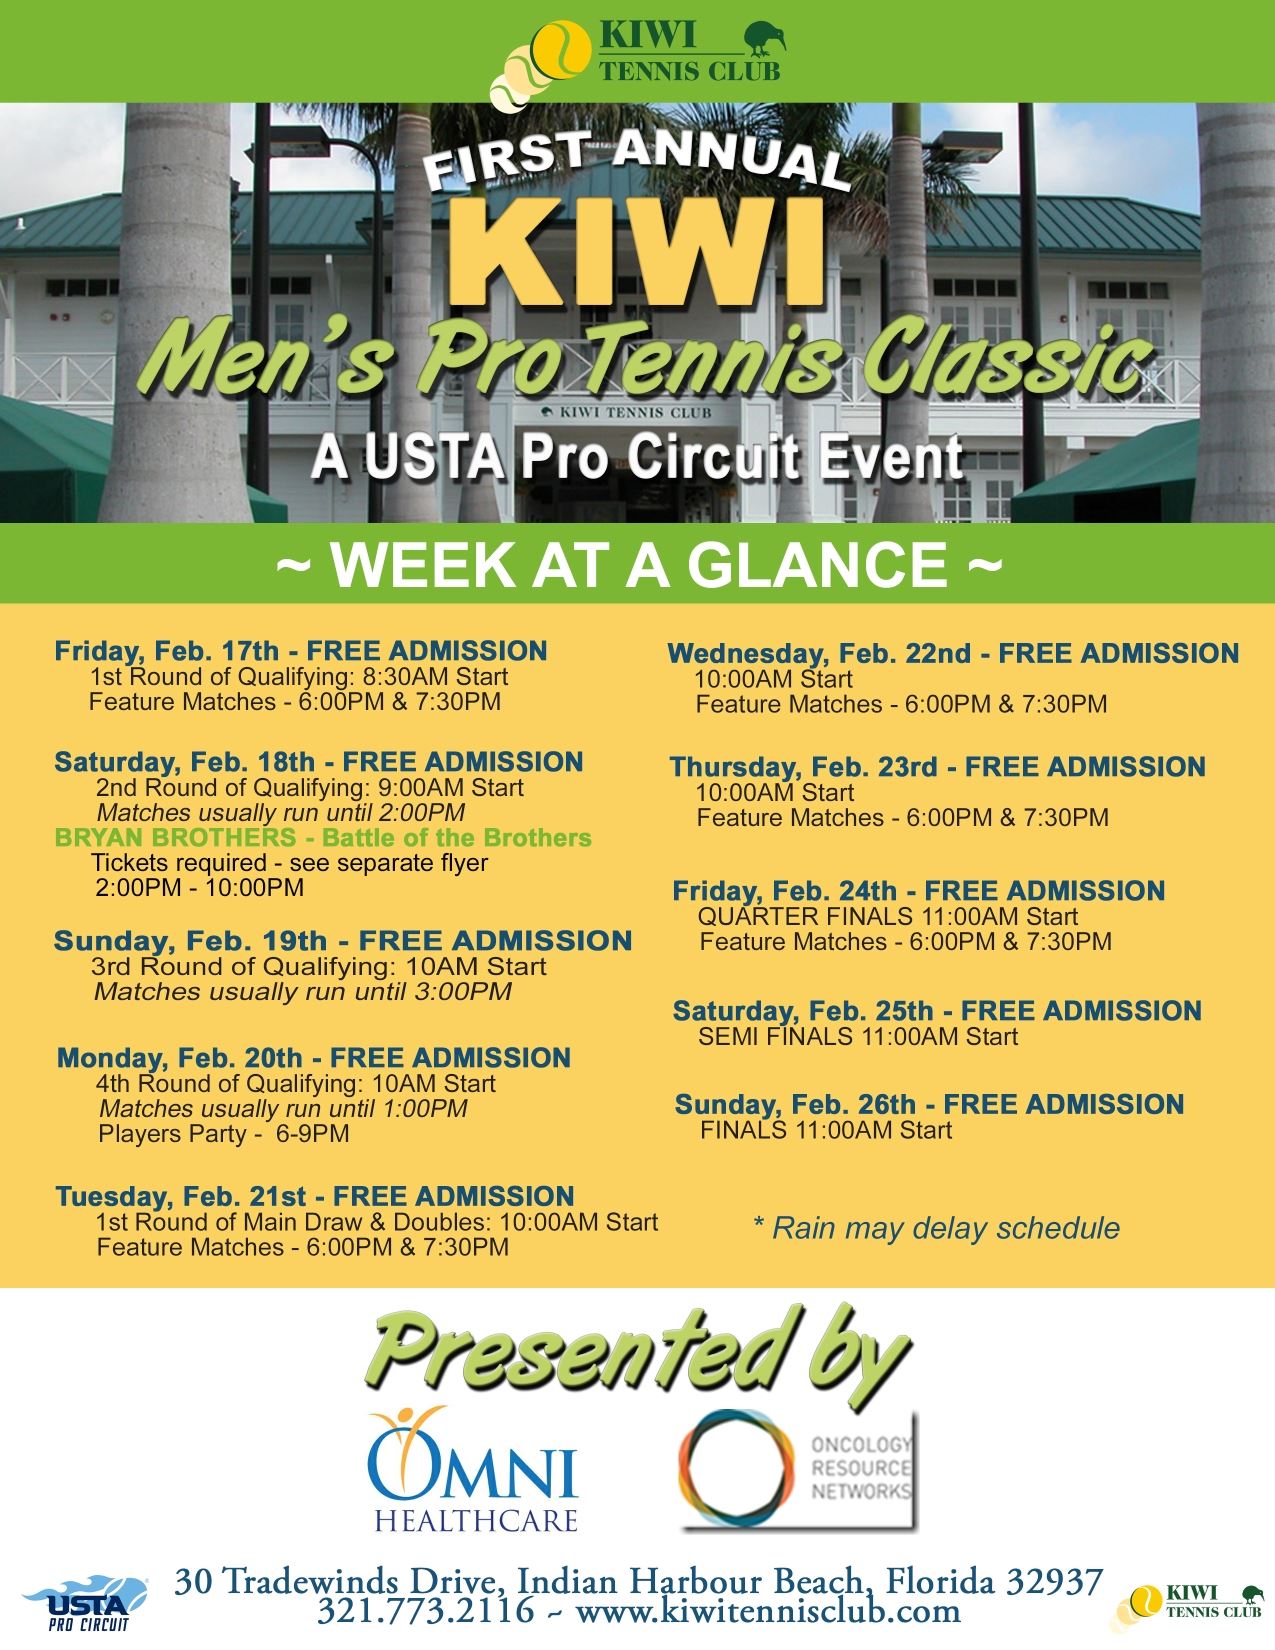 Week at a Glance flyer